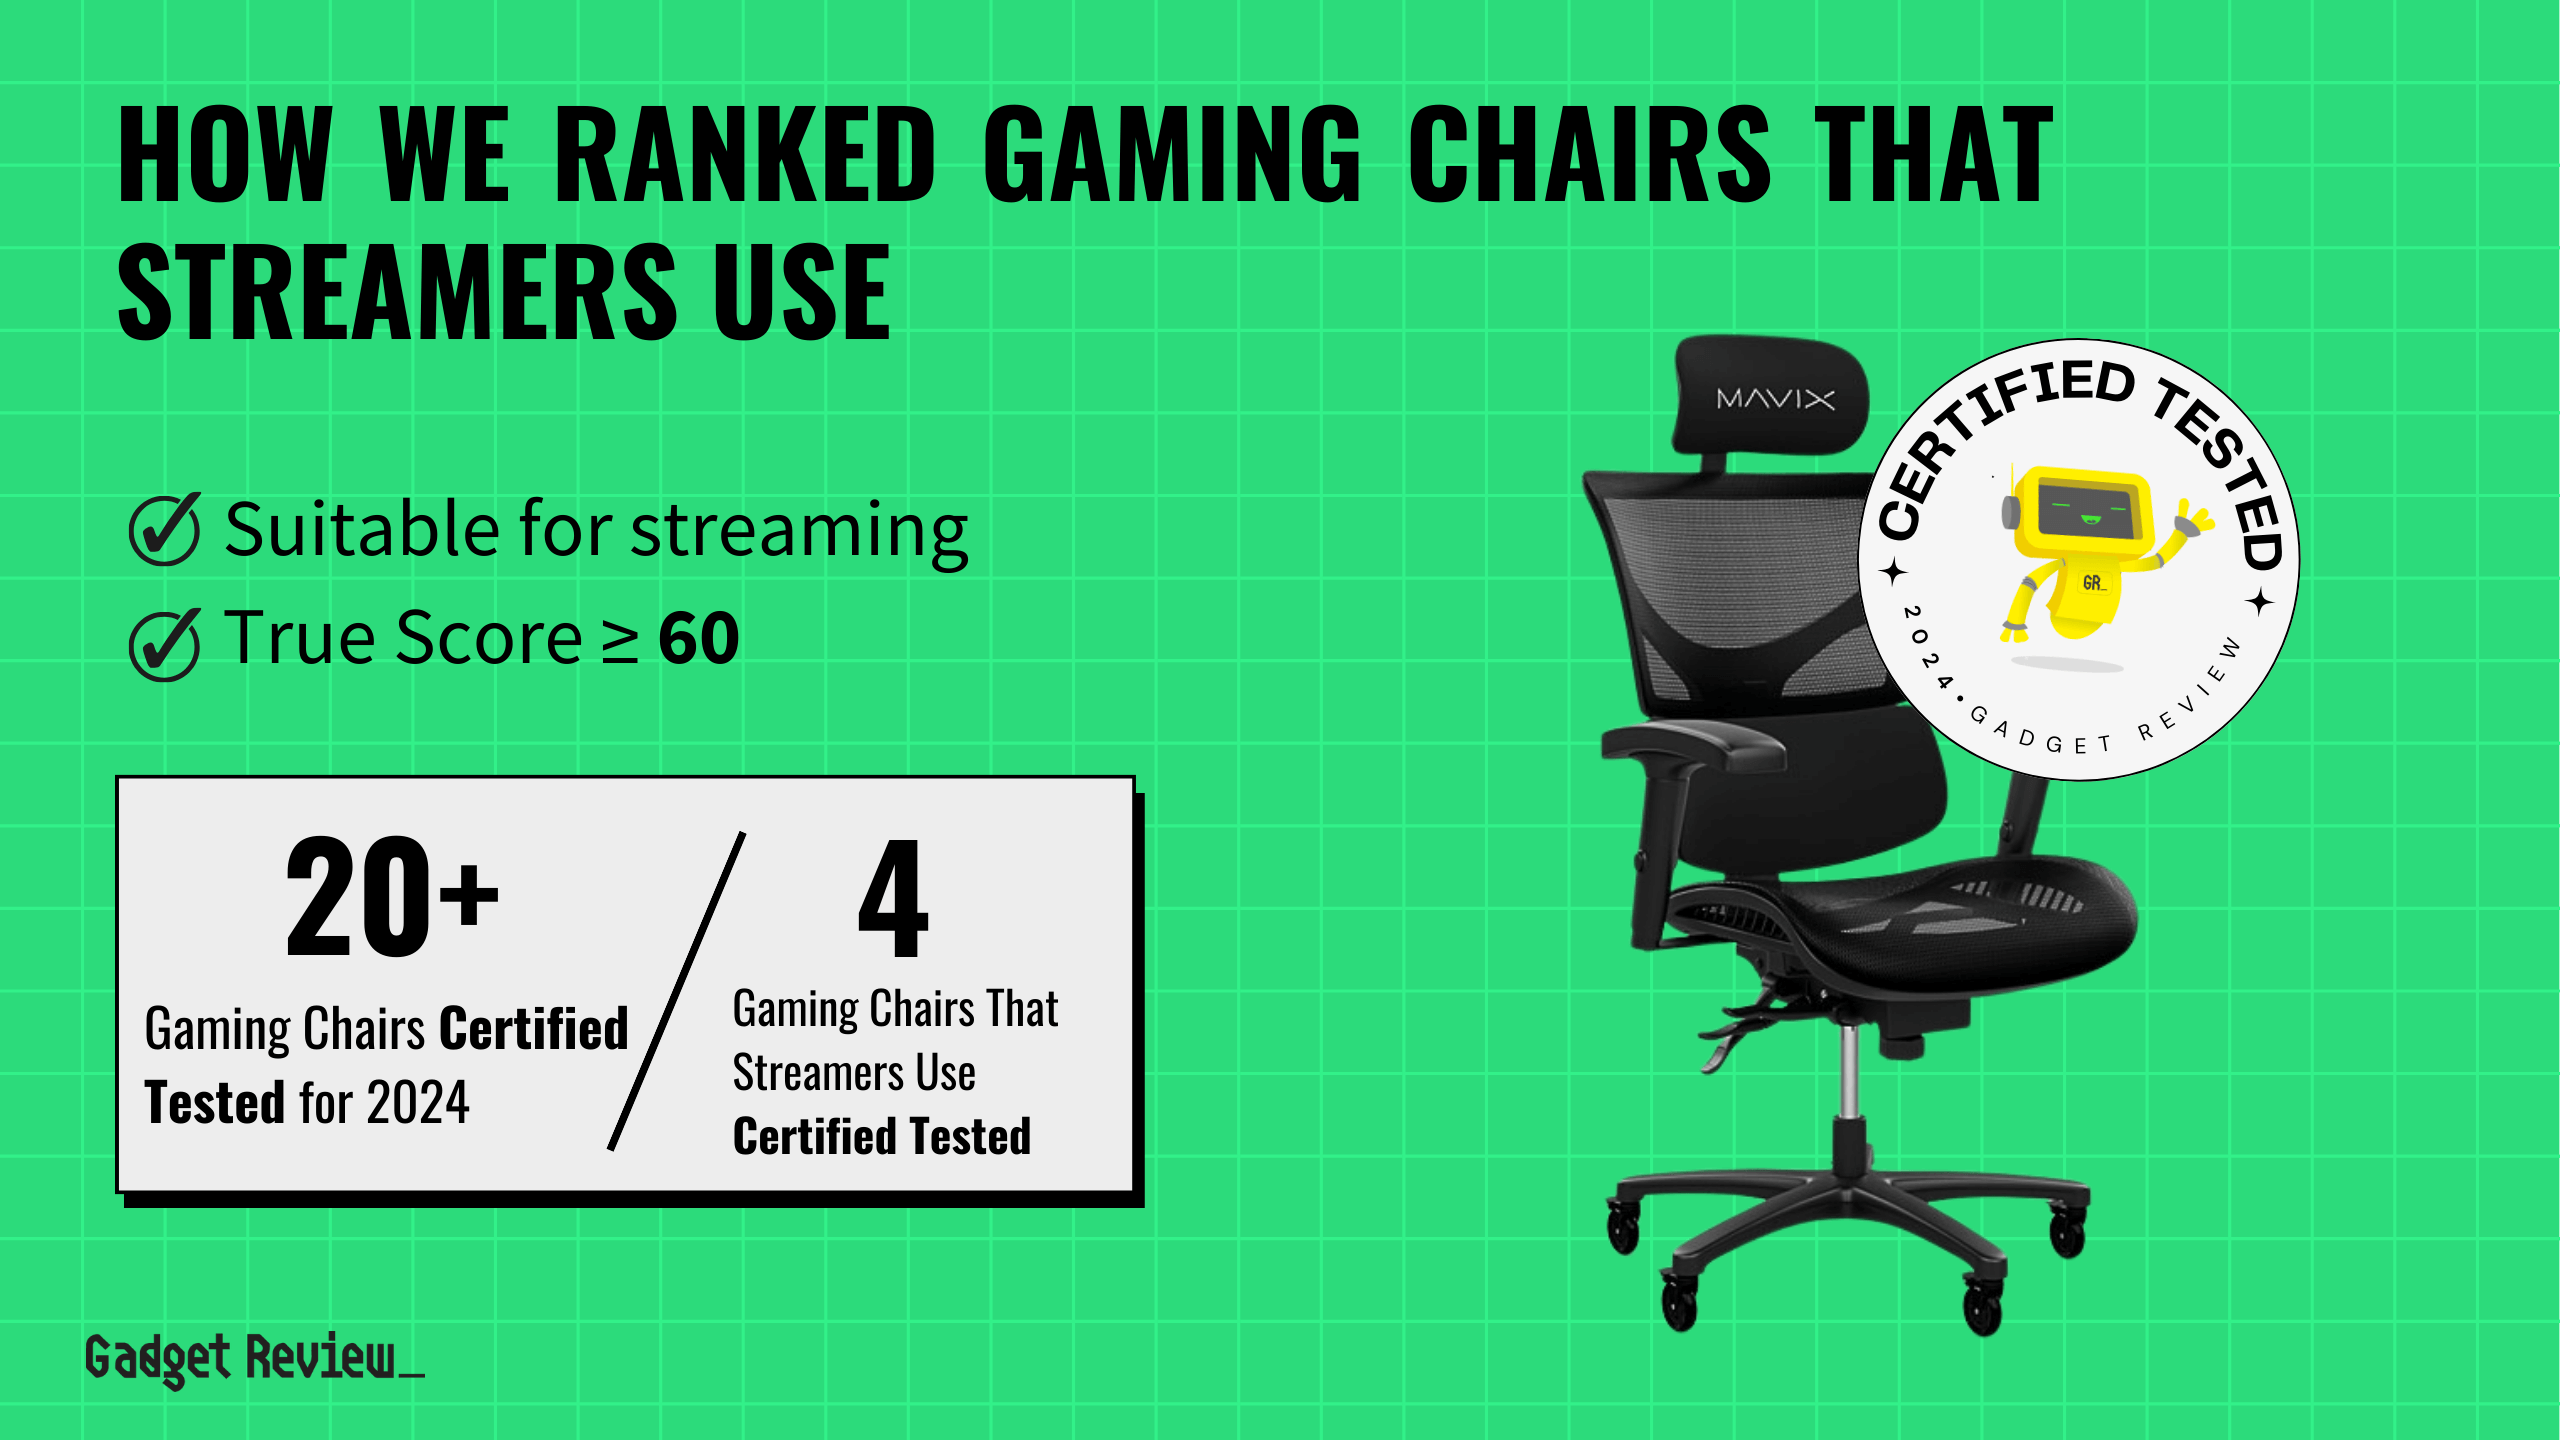 what gaming chair do streamers use guide that shows the top best gaming chair model